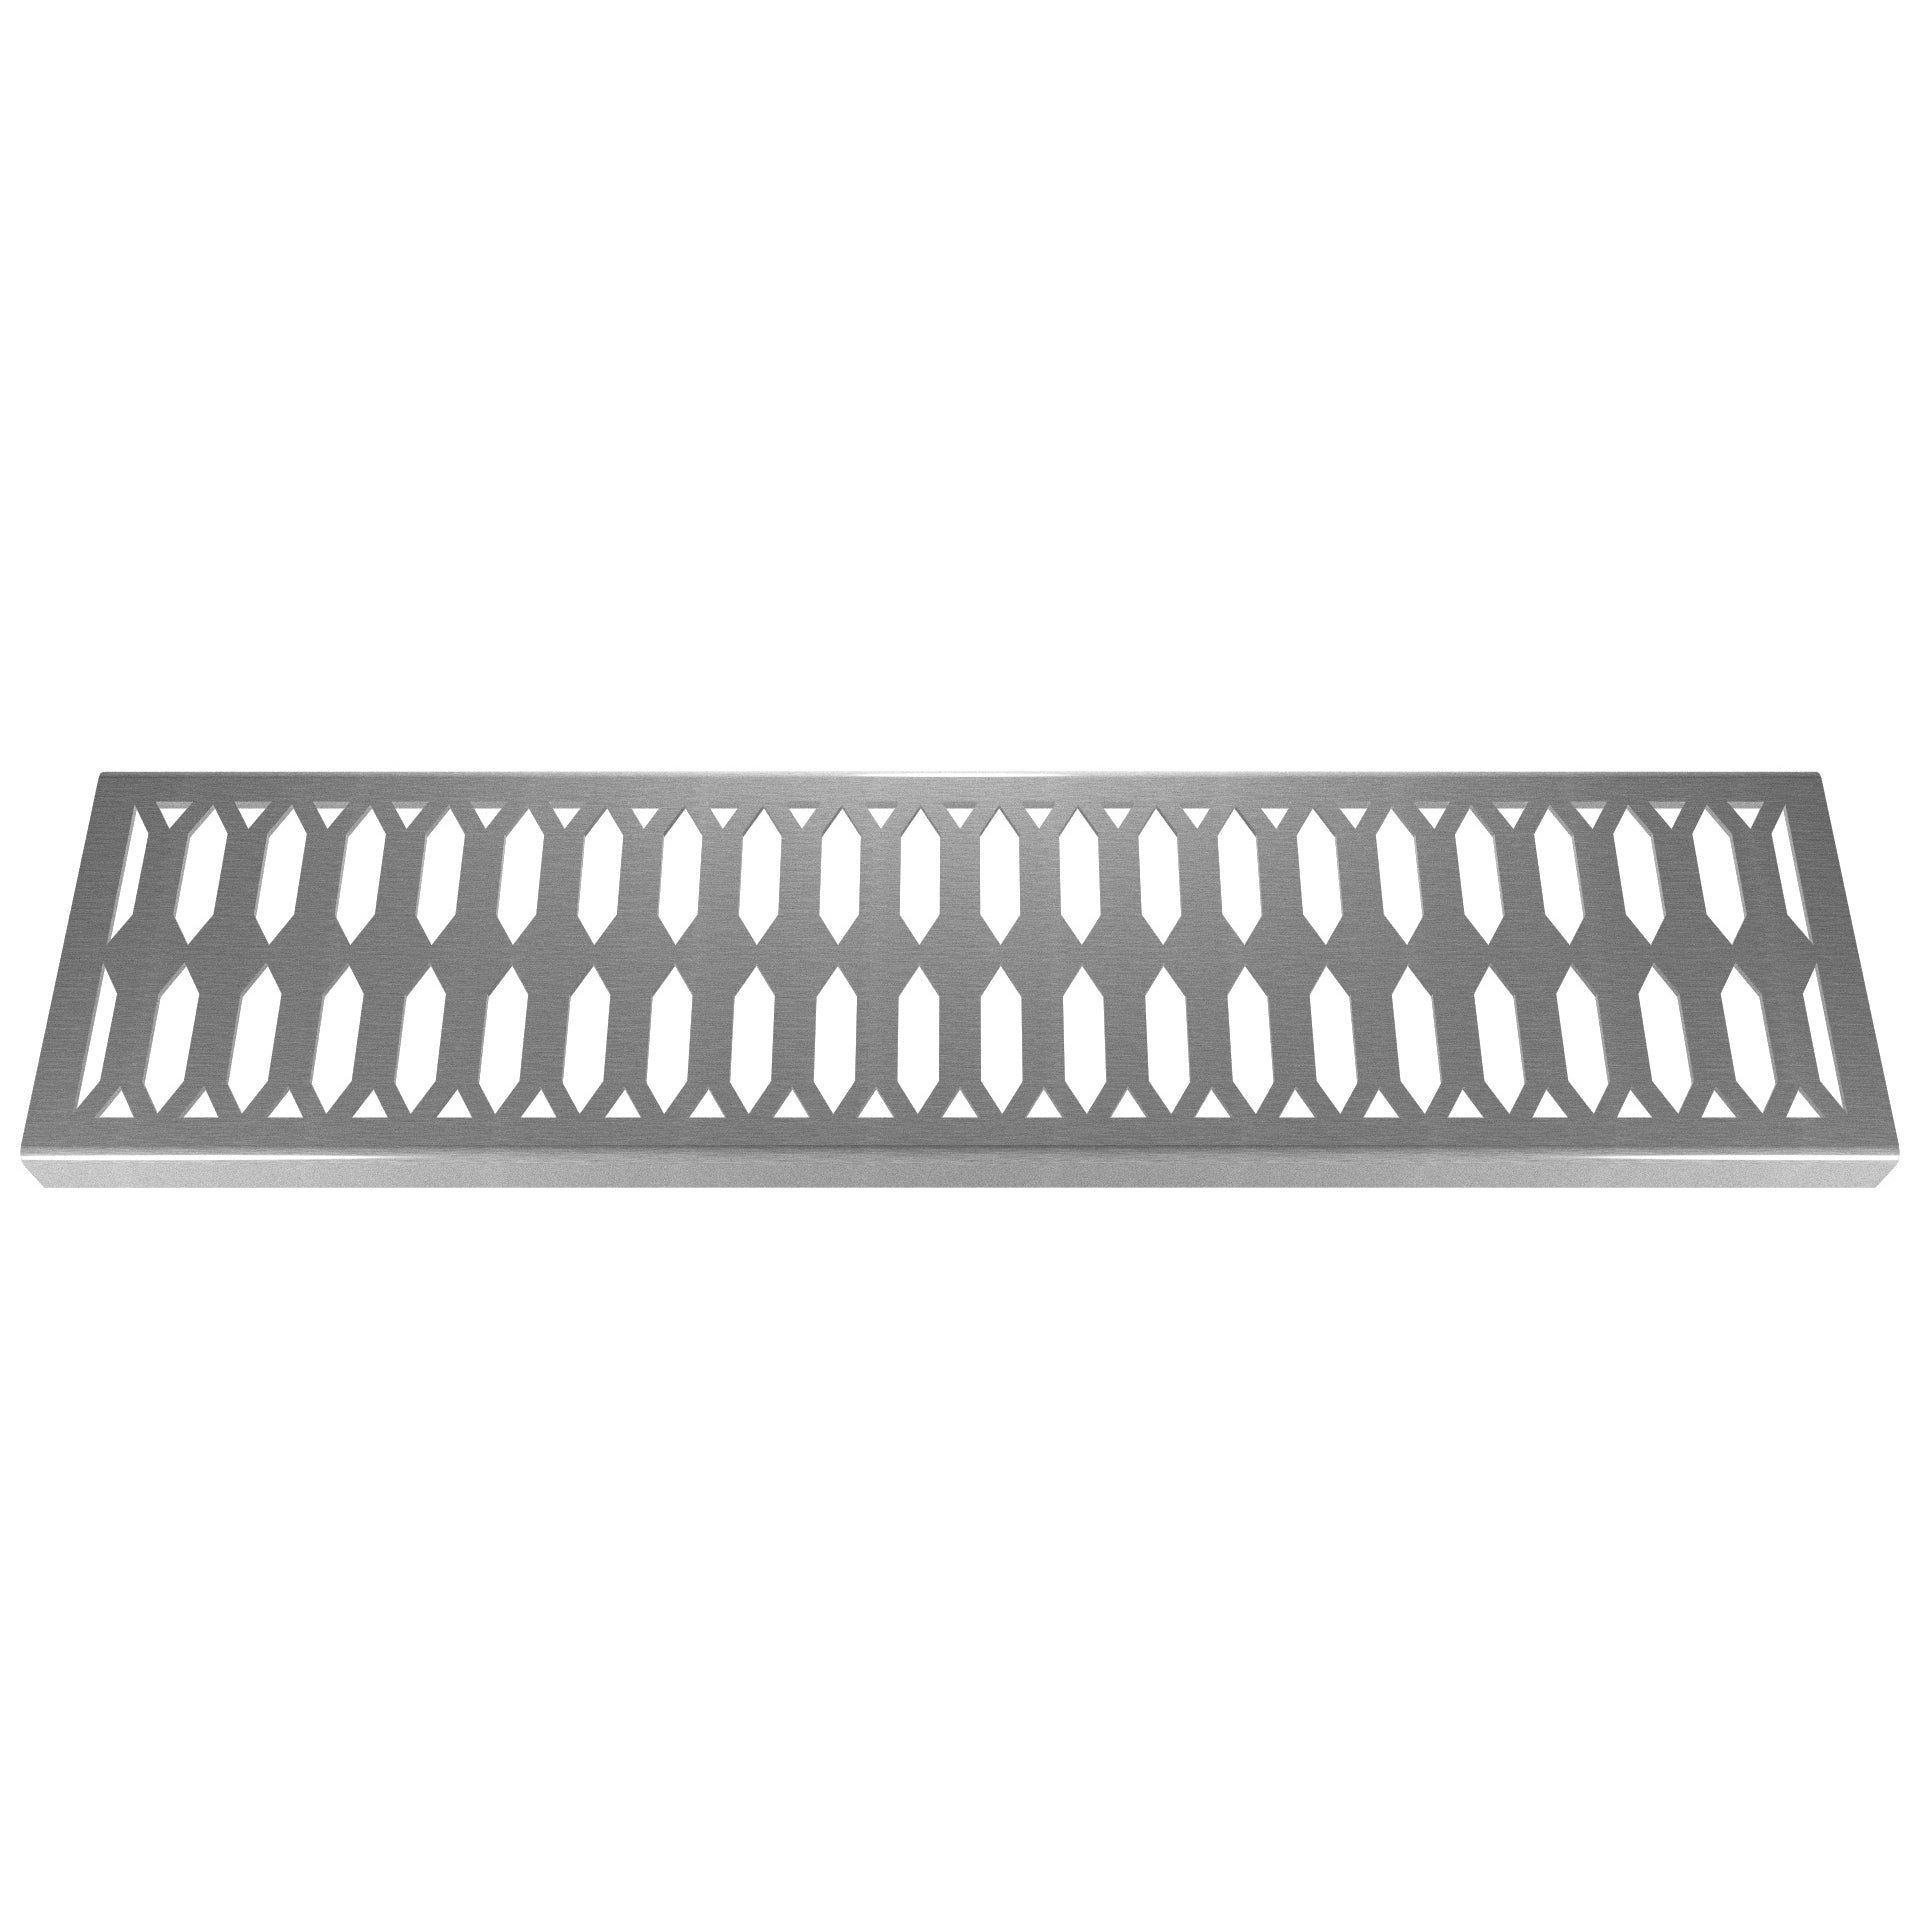 Crystal 304 Stainless Steel Channel Drain Grate 125 x 1000mm (5 Inch)